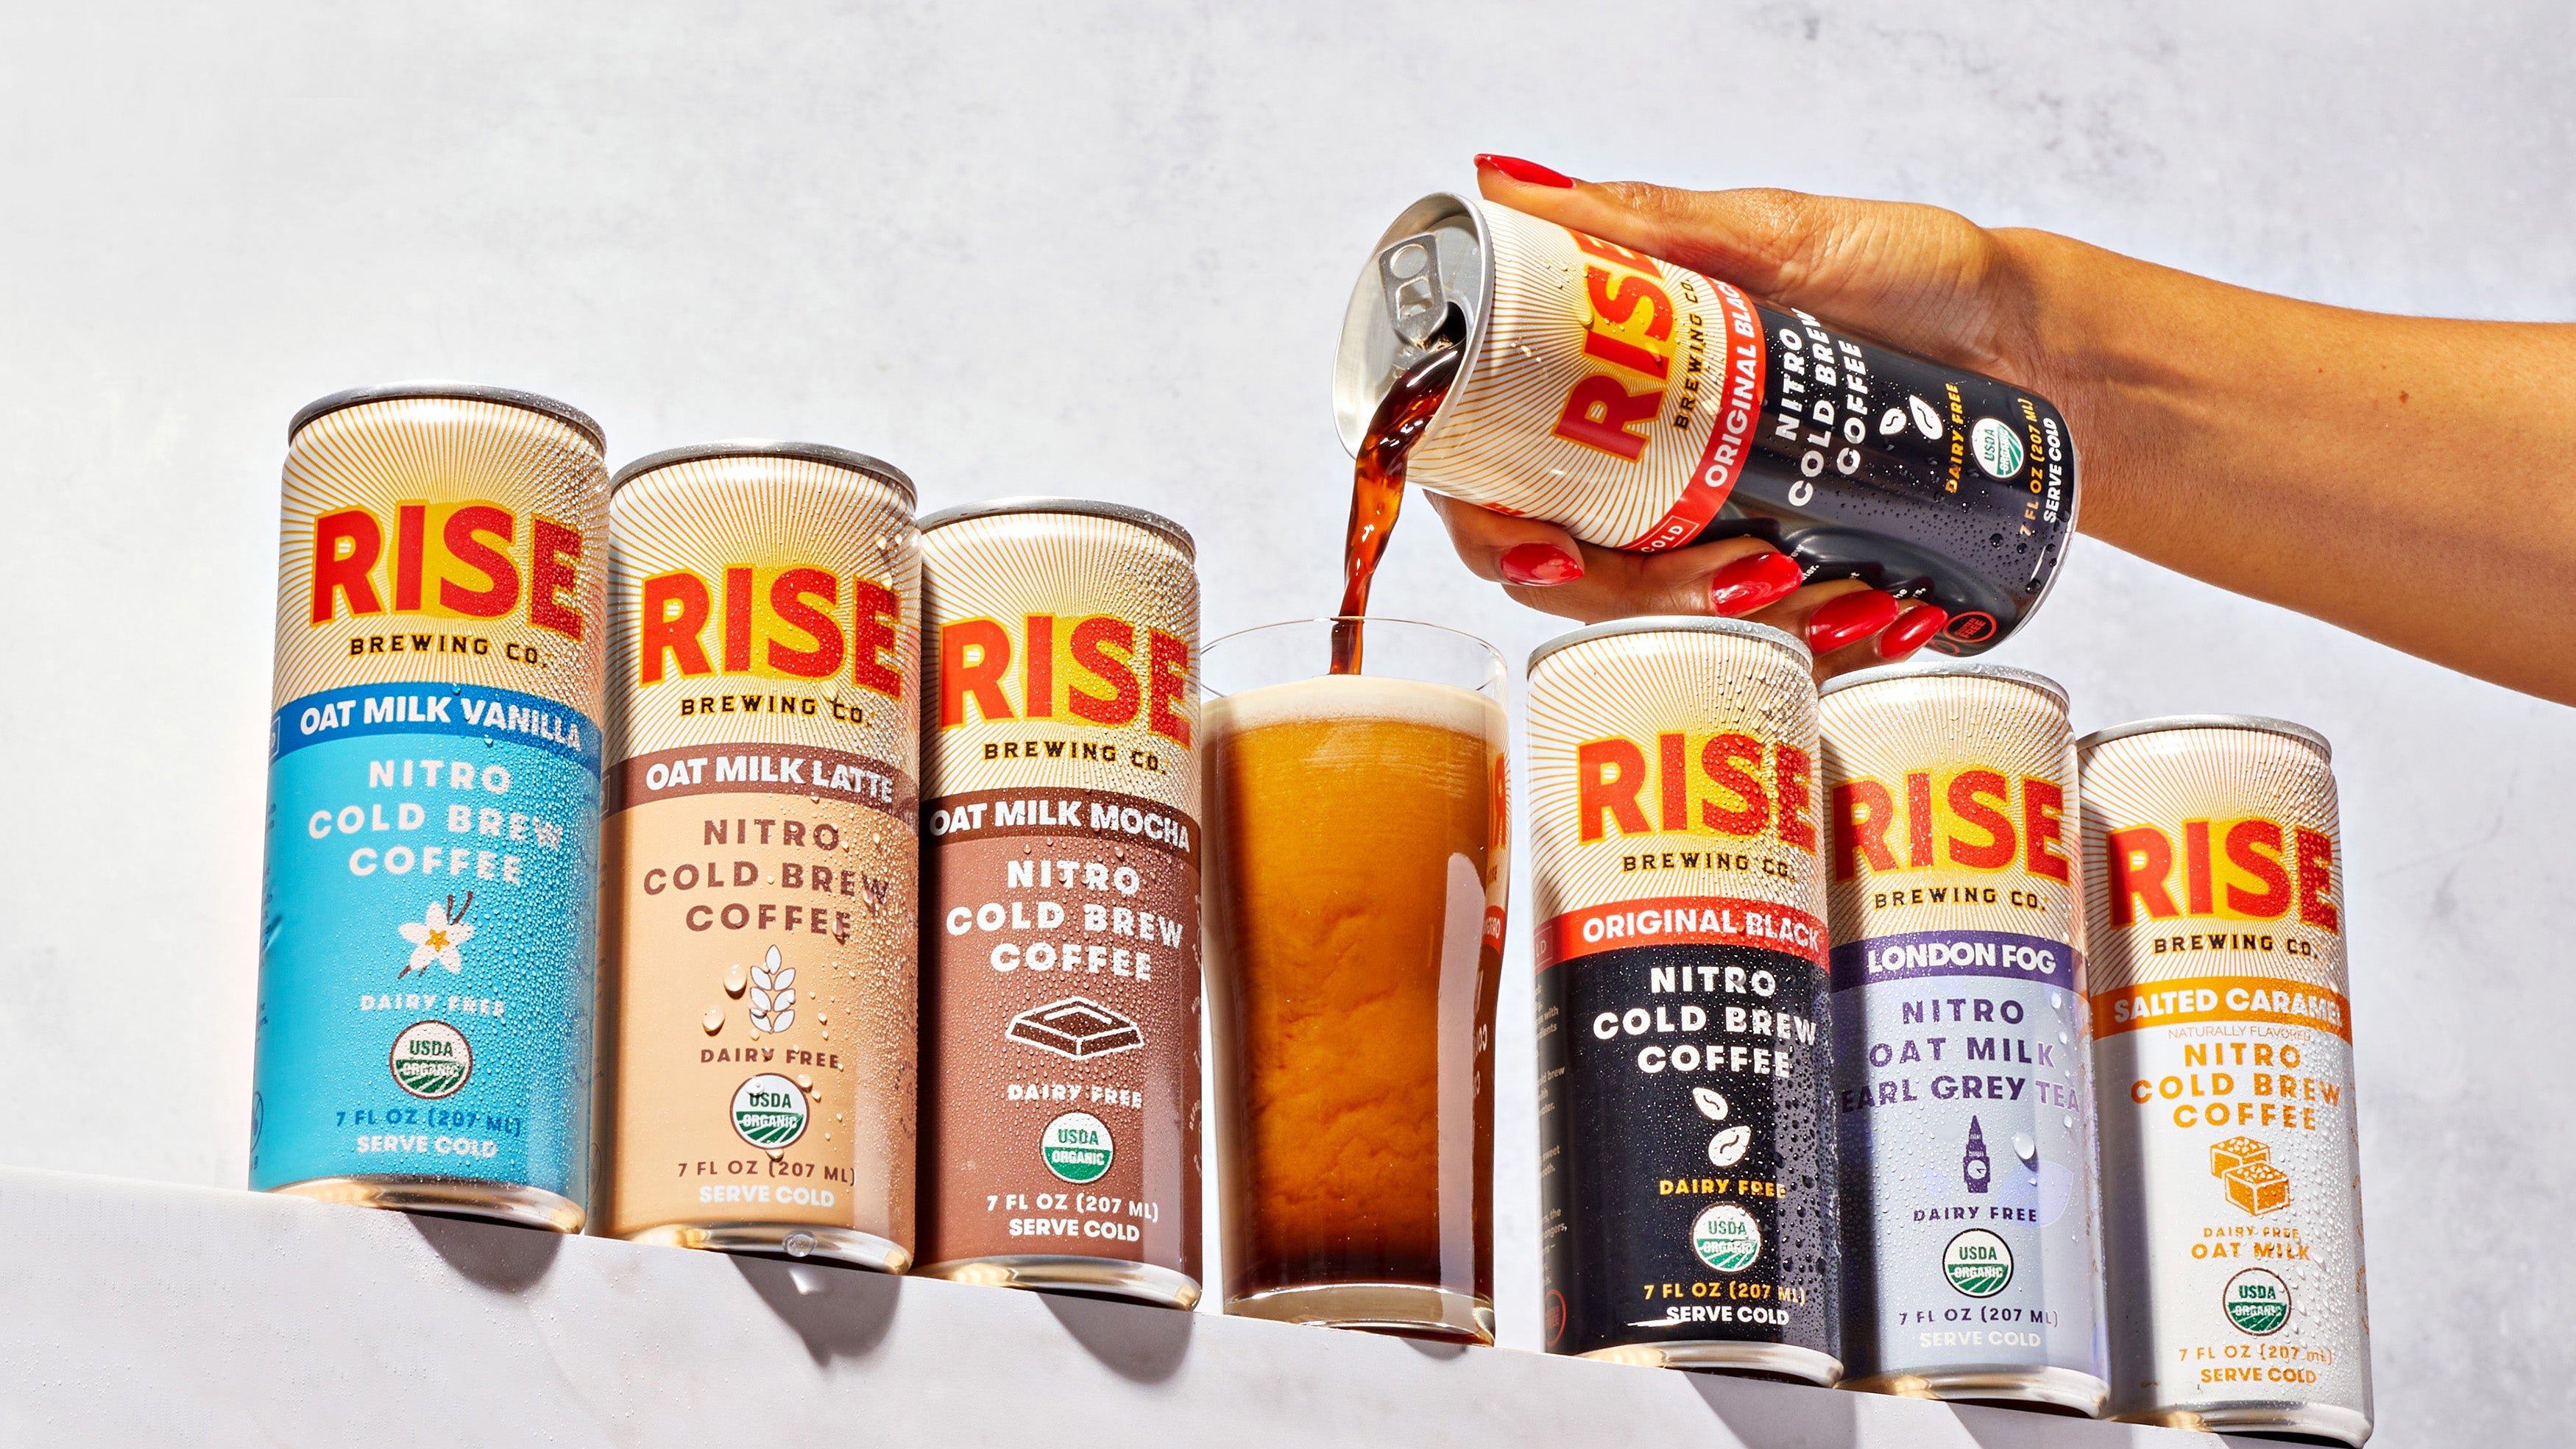 RISE Brewing Co. Subscriptions Save 10%